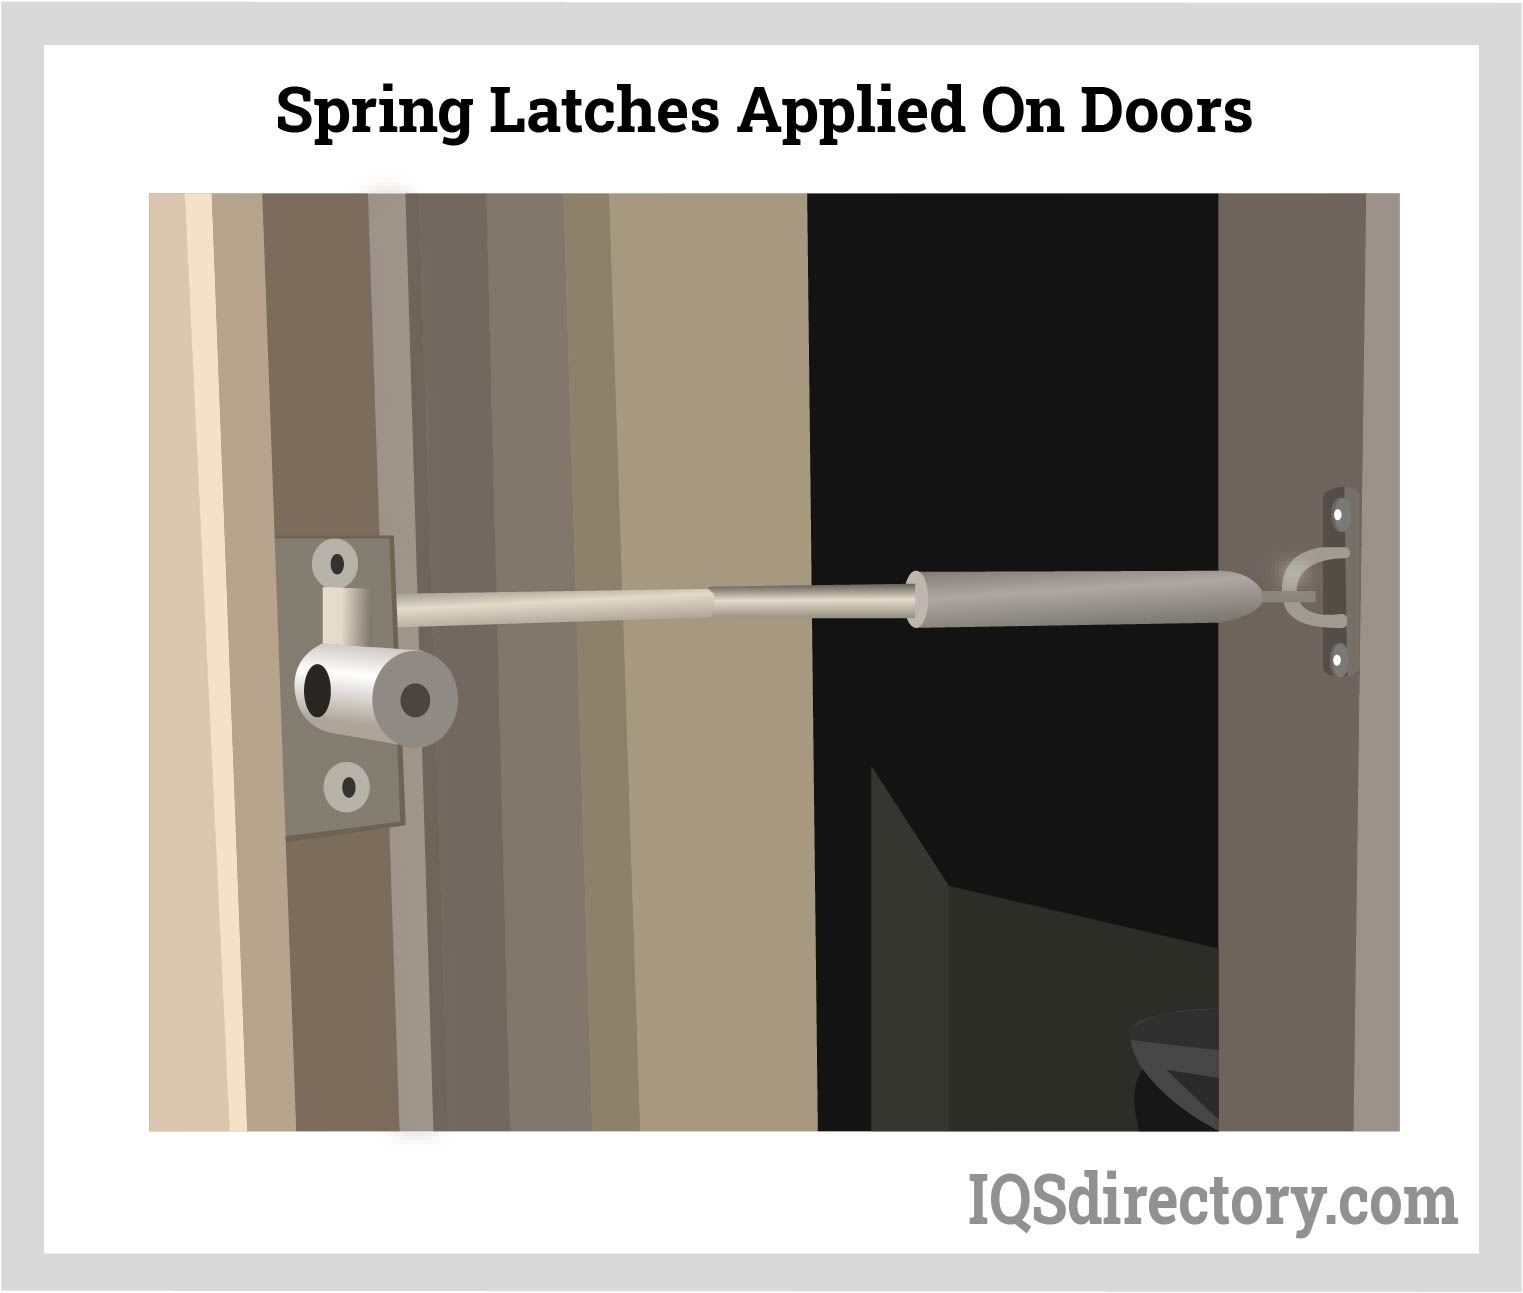 Spring Latches Applied on Doors